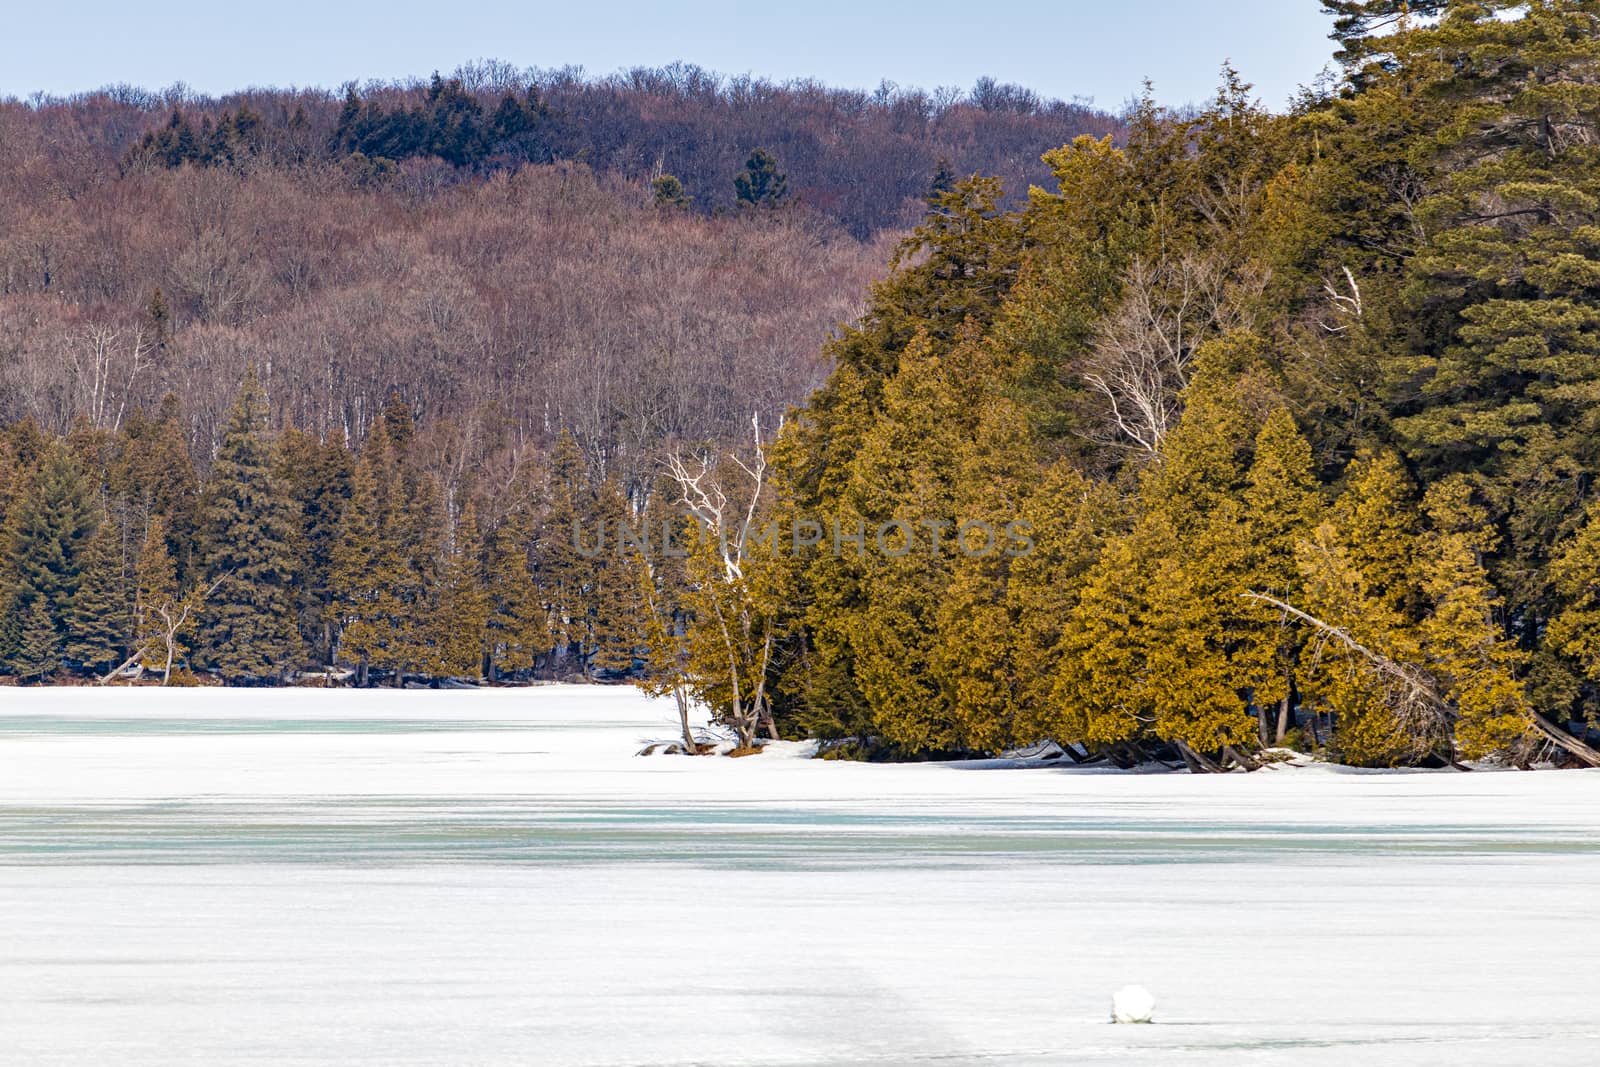 A frozen lake, specifically Meech Lake near Chelsea, Quebec in Canada, appears surrounded by forest trees and covered in a layer of snow and ice.